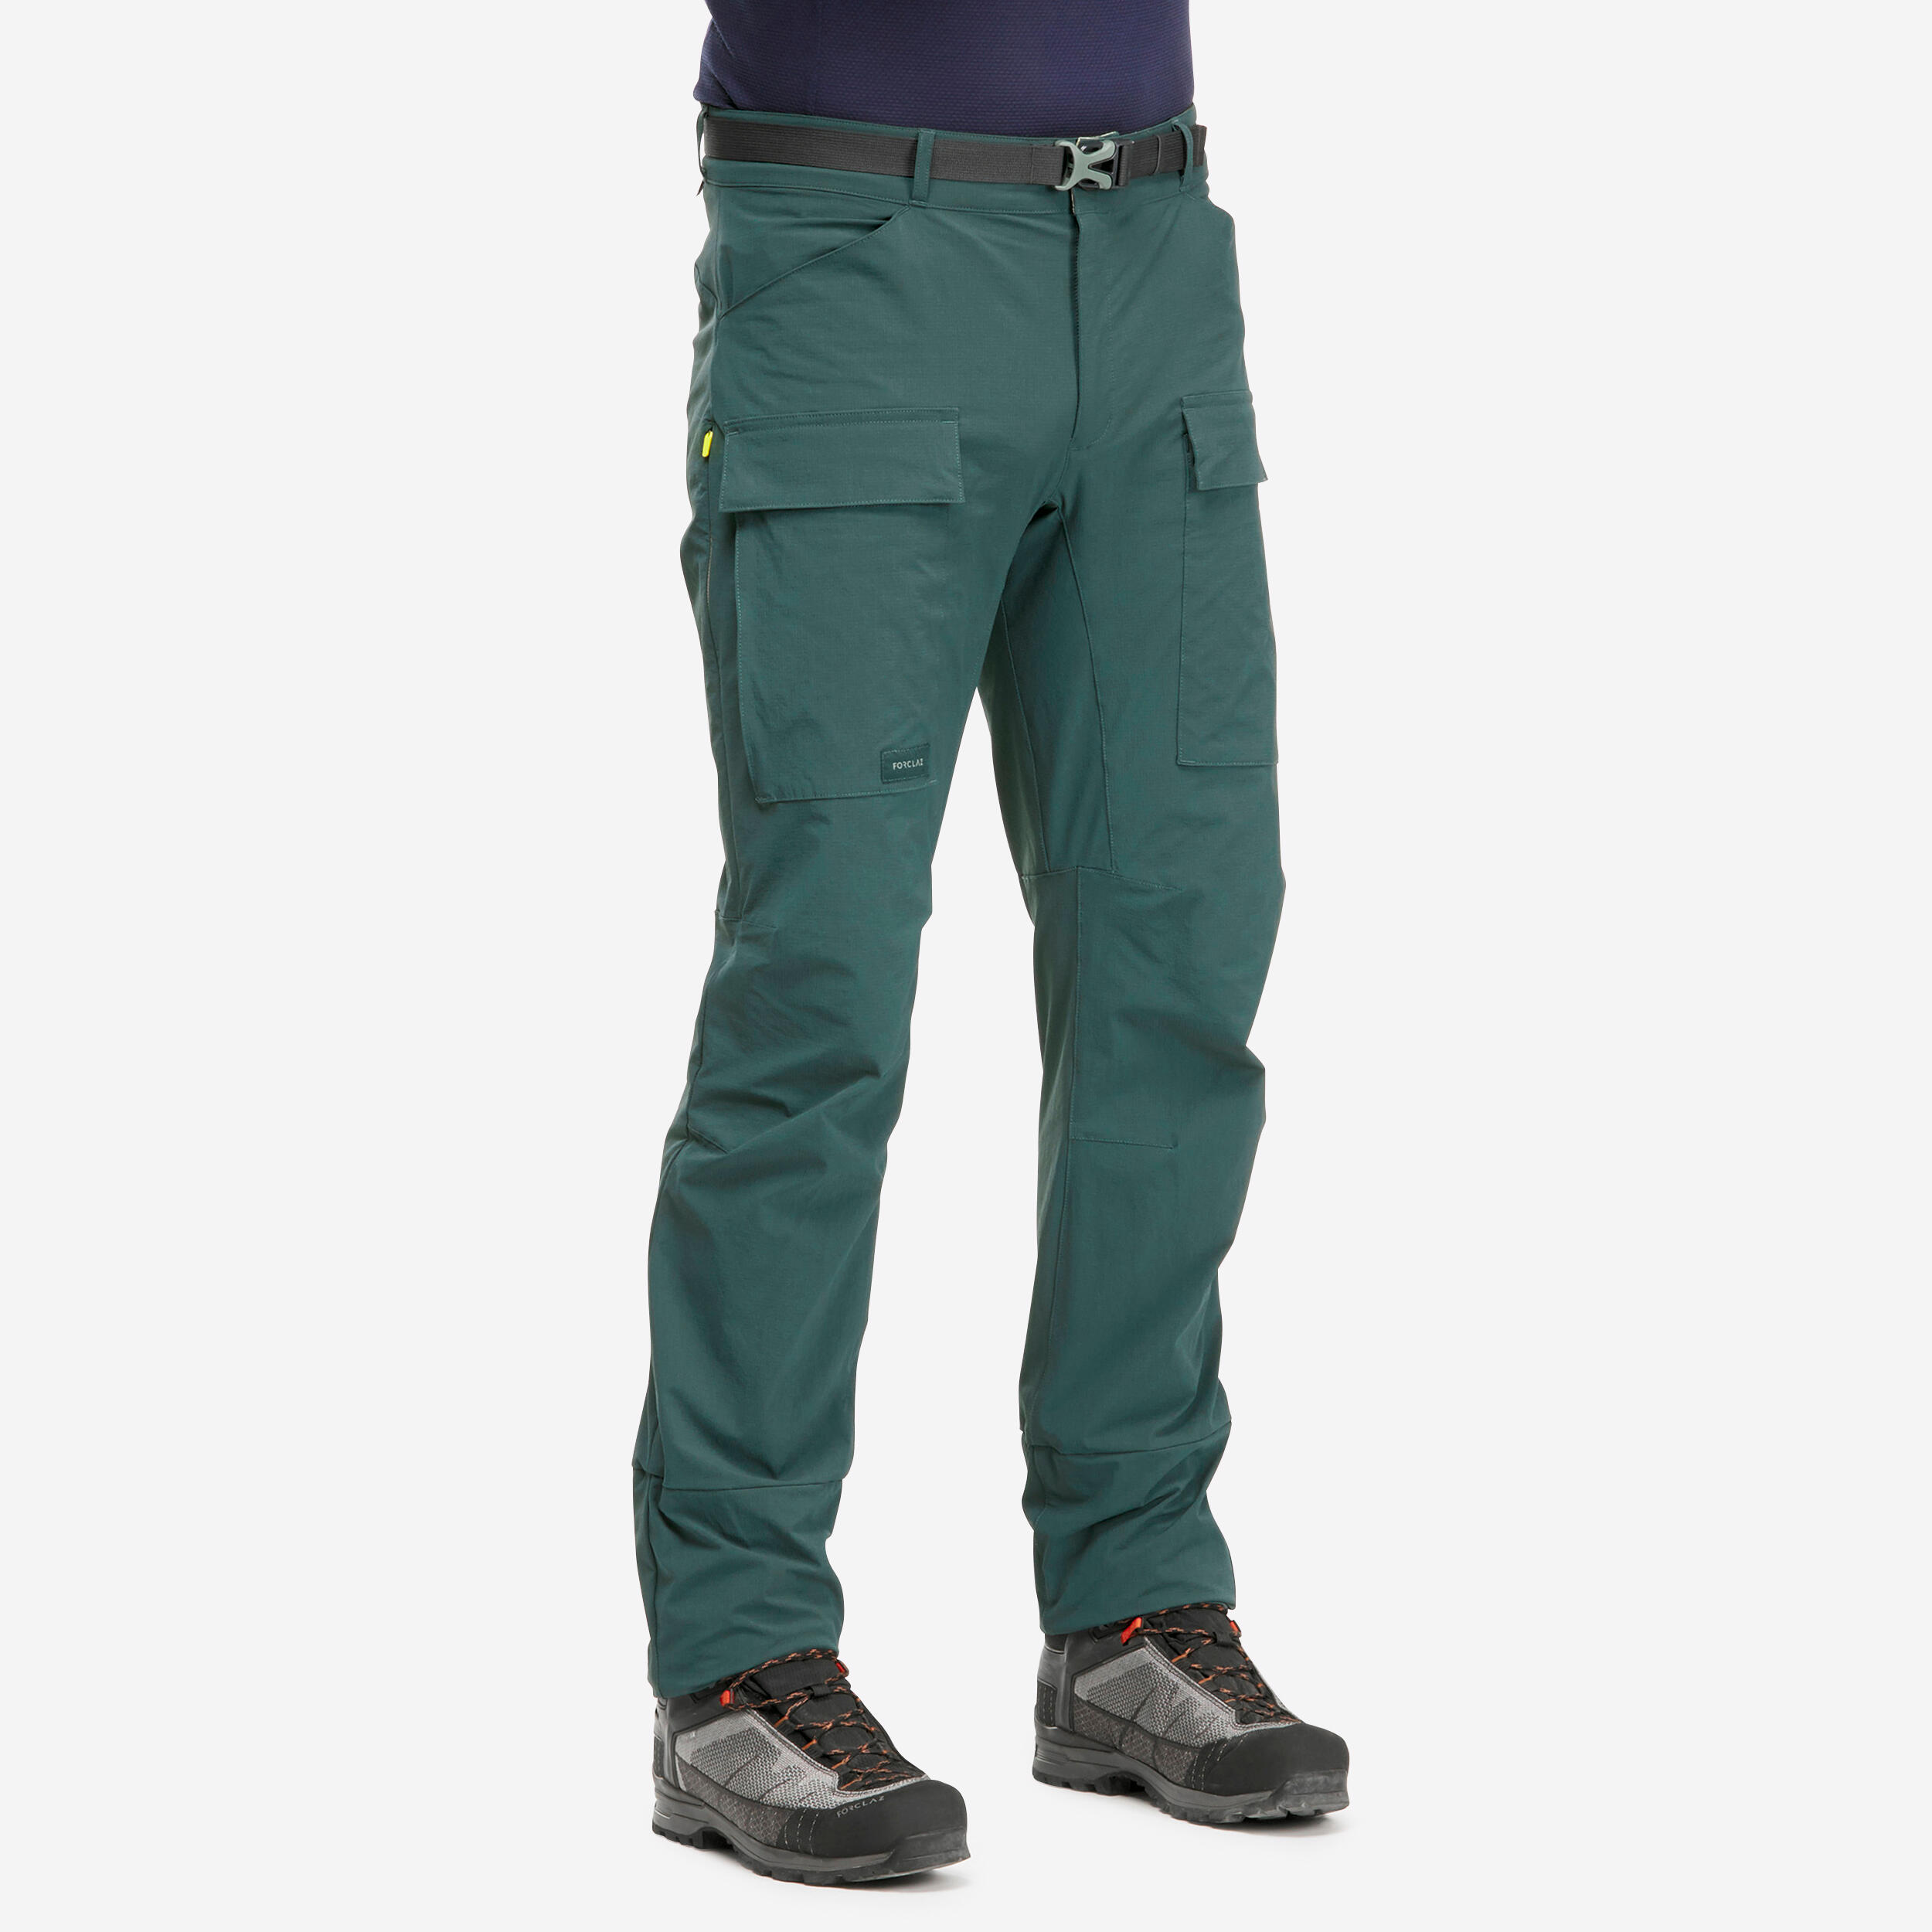 NoBu.gs® Insect Repellent Cargo Pants – NoBu.gs® Insect Repellent Clothing